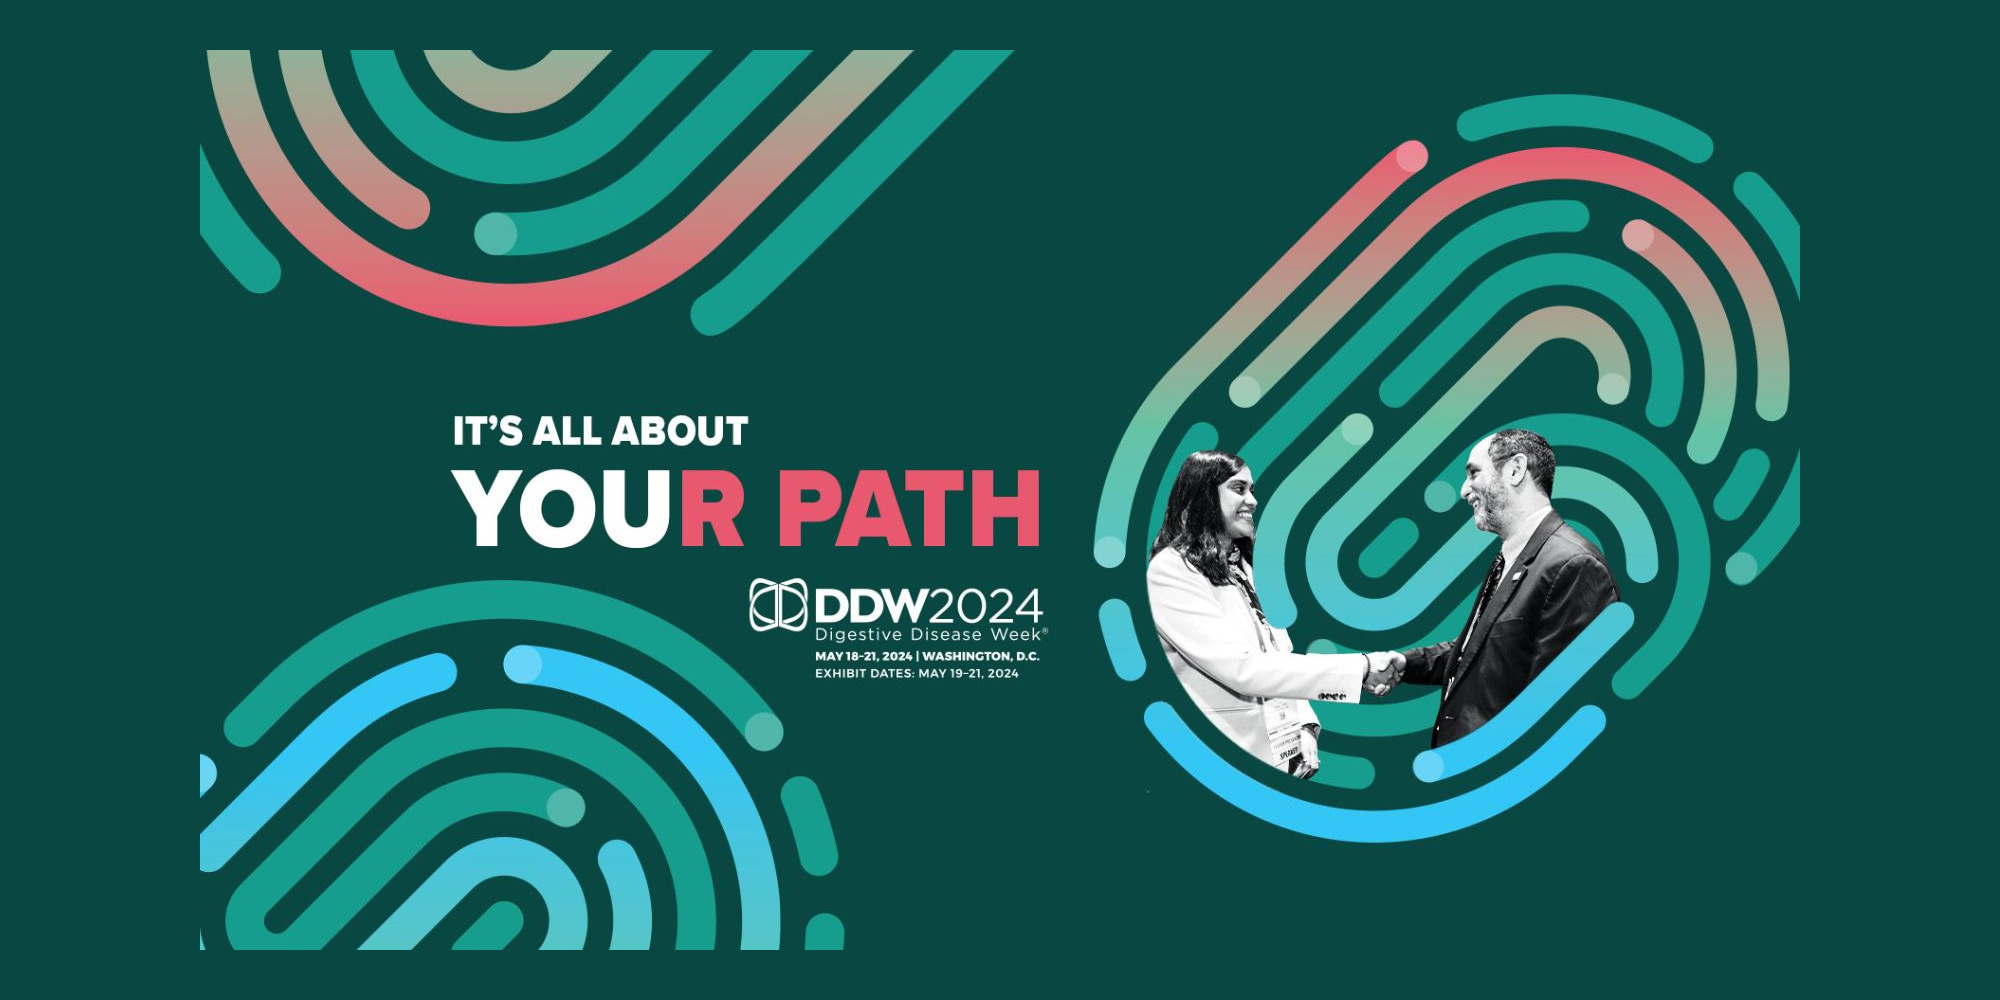 DDW will attract digestive disease professionals from around the world 